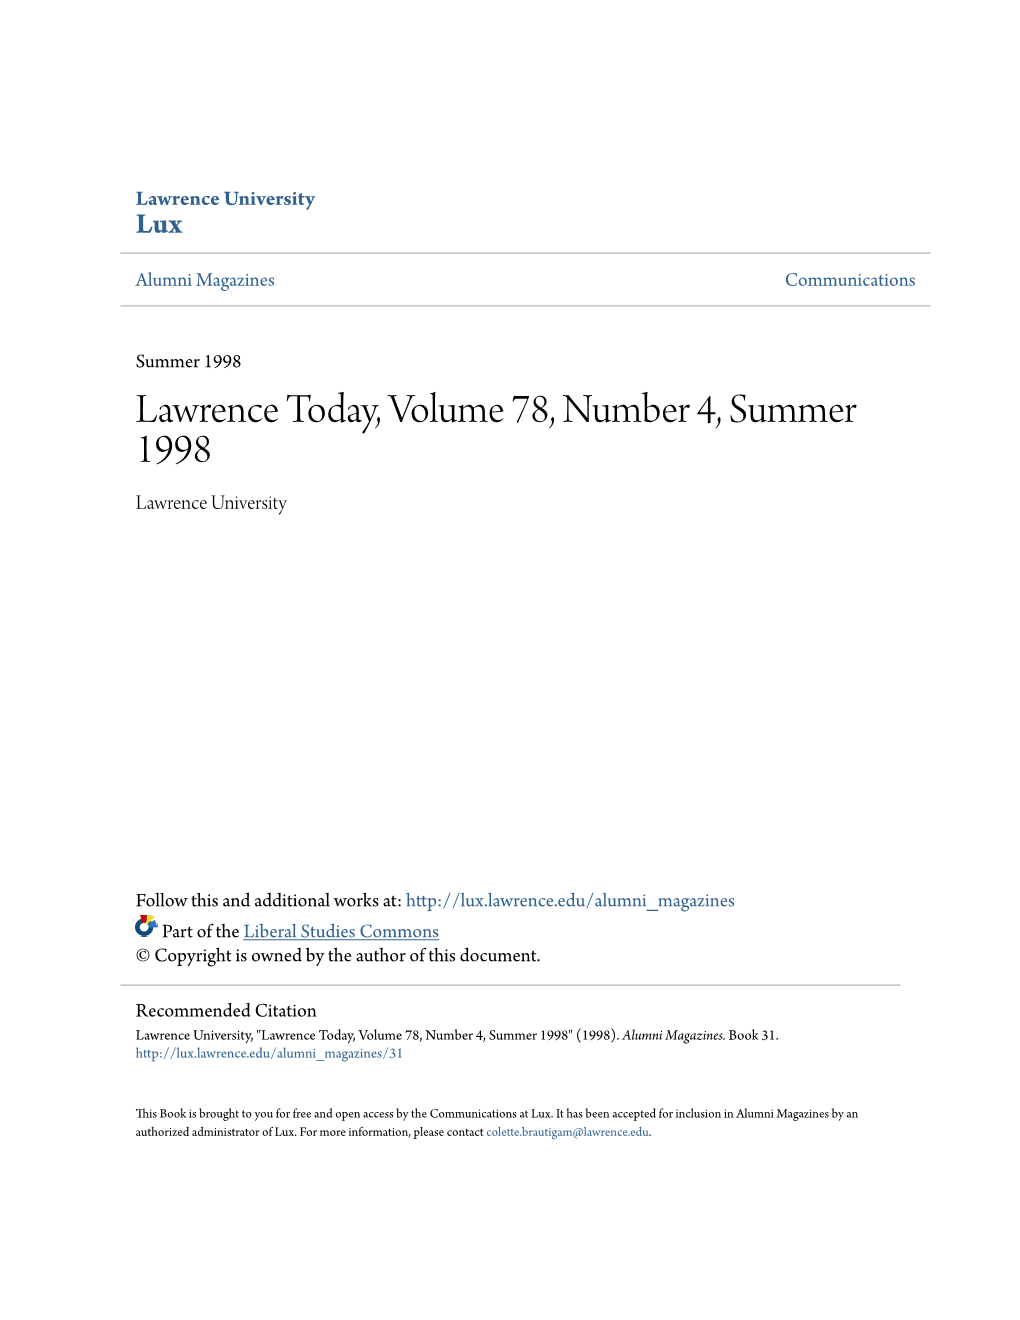 Lawrence Today, Volume 78, Number 4, Summer 1998 Lawrence University